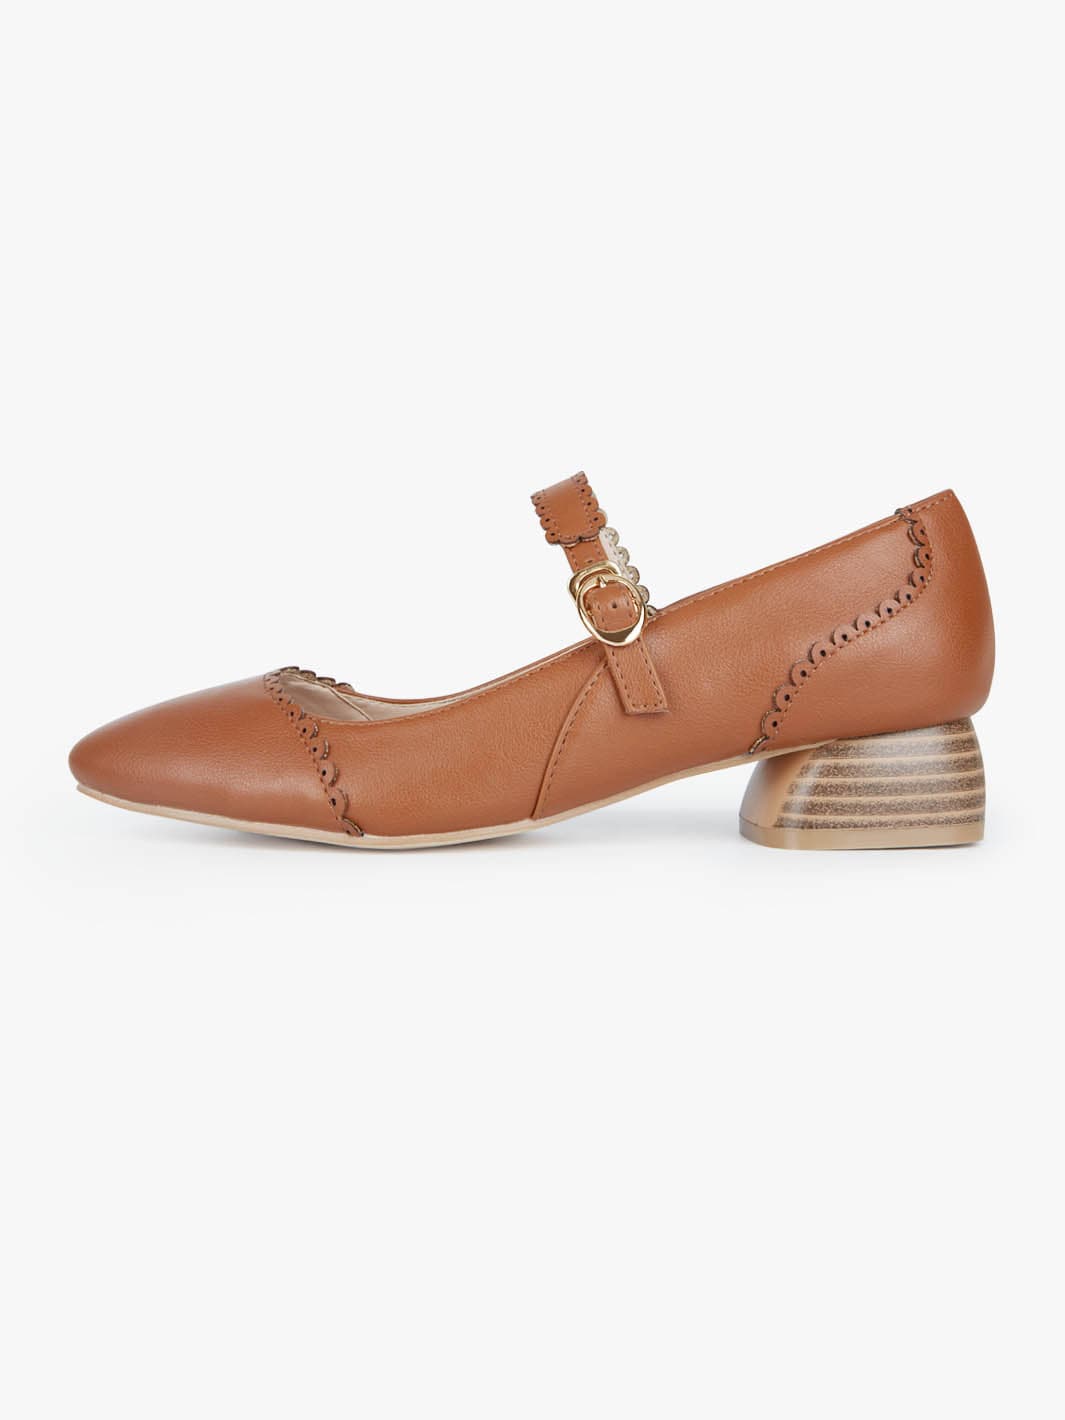 Beautiful Flora Classic Shoes - Ethically Made Vegan Leather Shoes